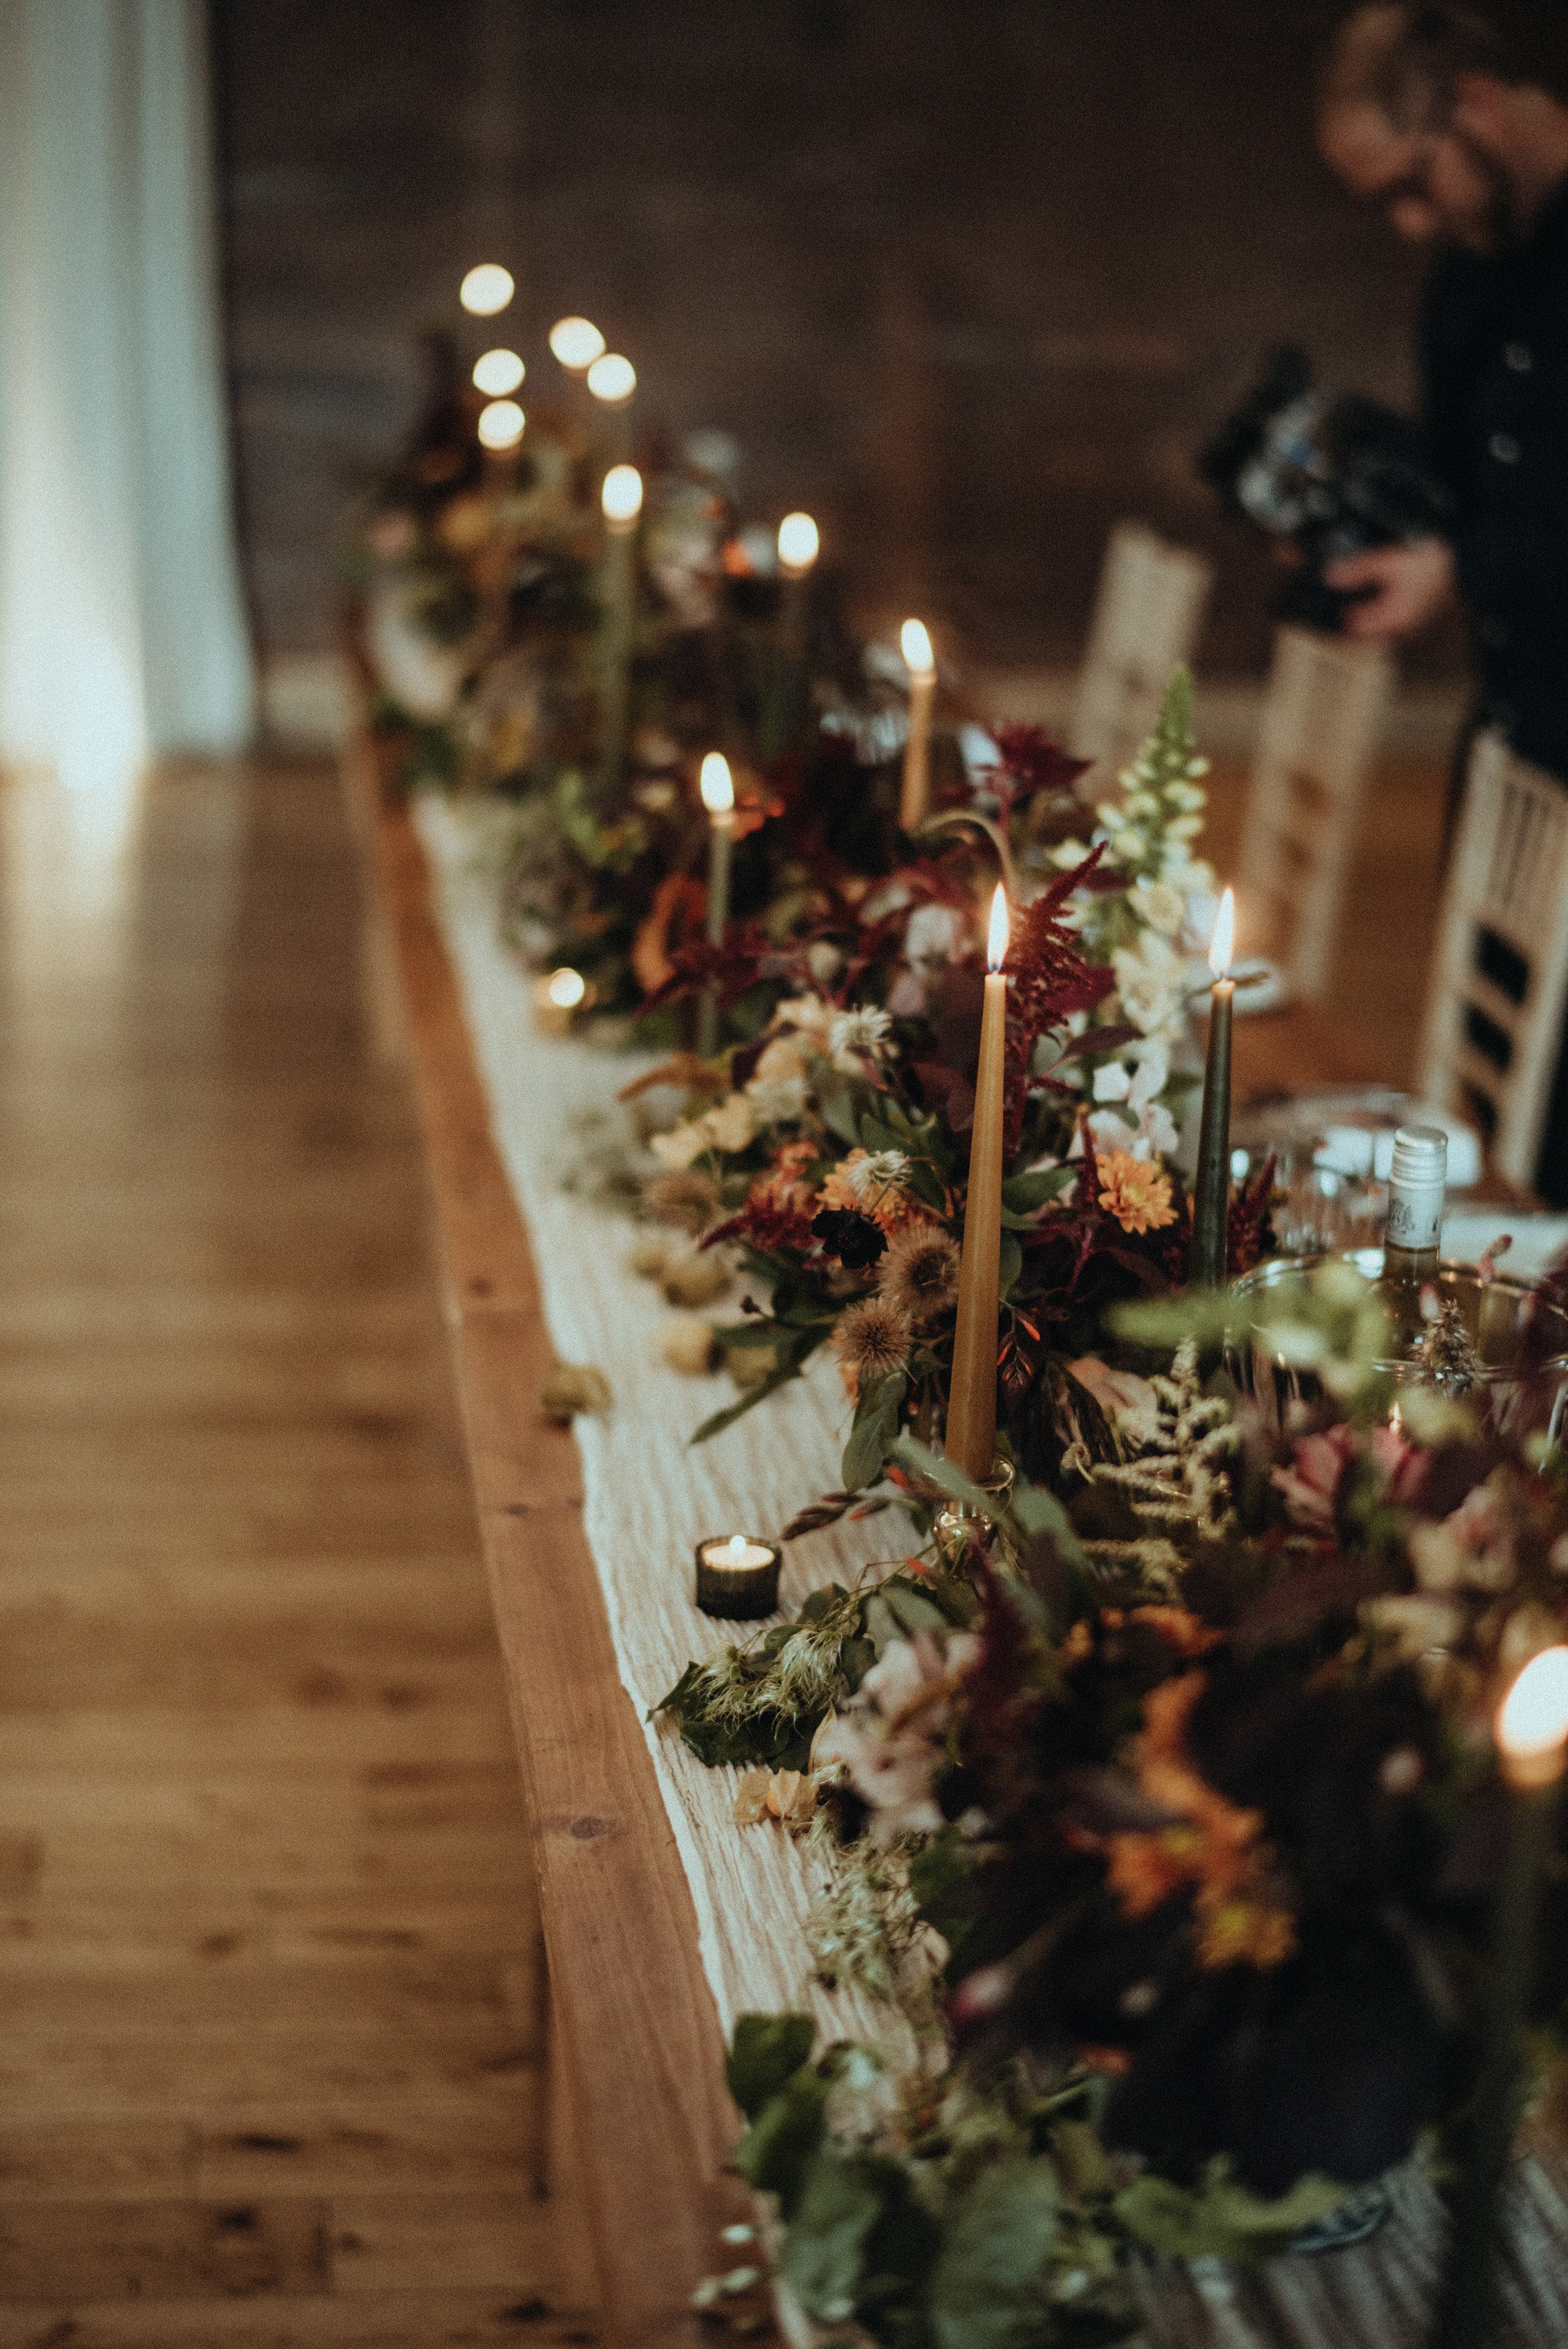 Candles and rustic decor on a long banqueting table for romantic wedding reception in the cotswolds